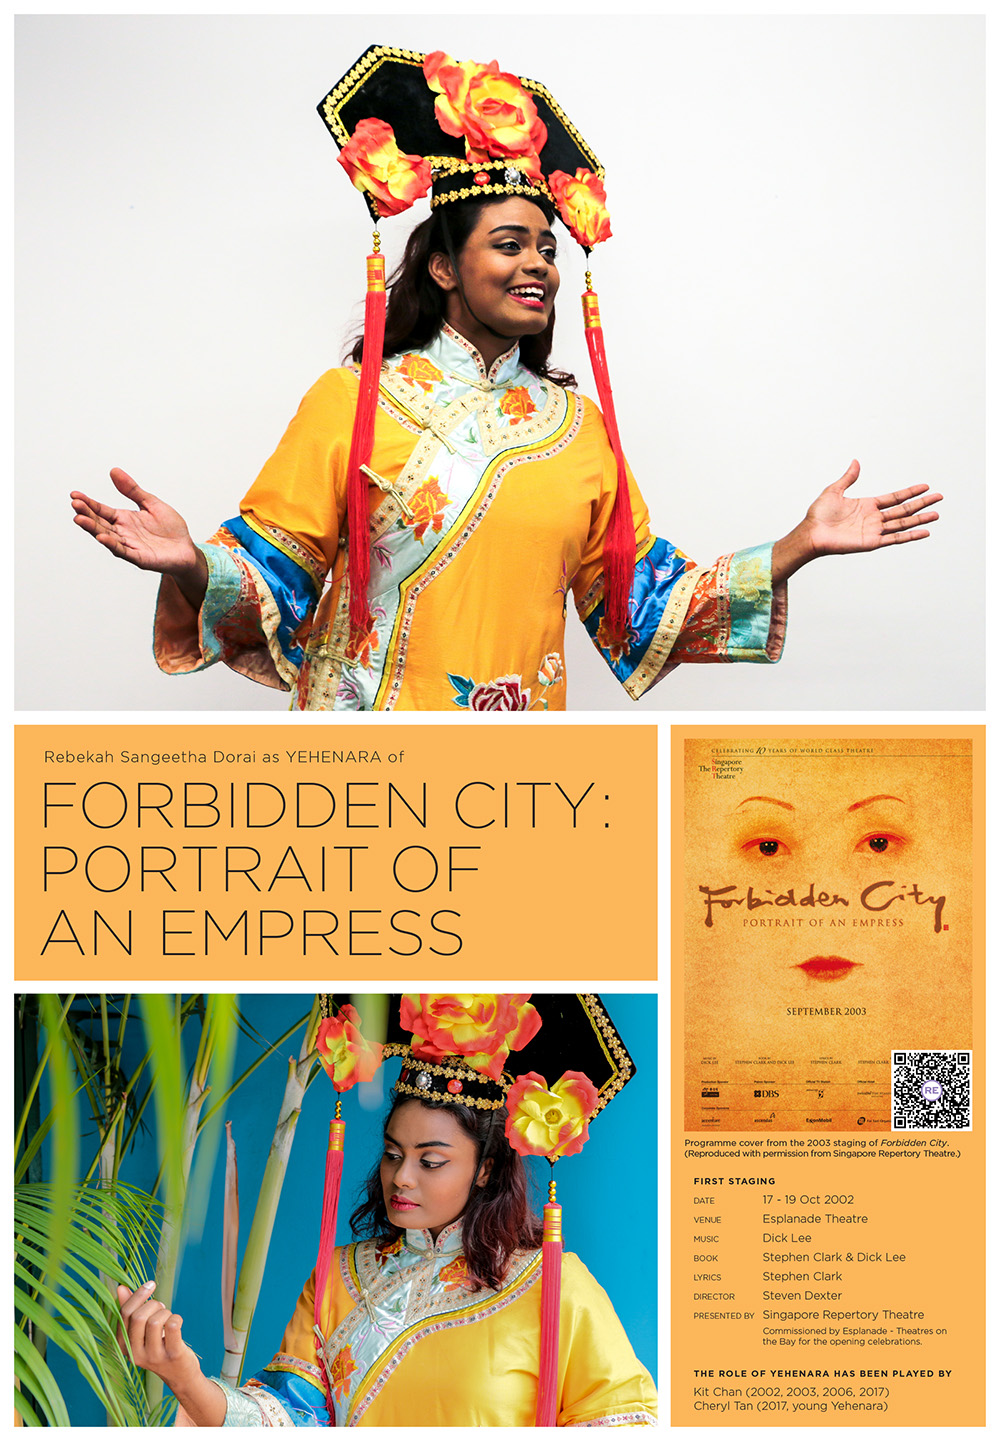 The top half of the poster features an ethnic Indian woman dressed in an Imperial Chinese royal dress. The bottom half of the poster features the history of staging Forbidden City: Portrait of an Empress